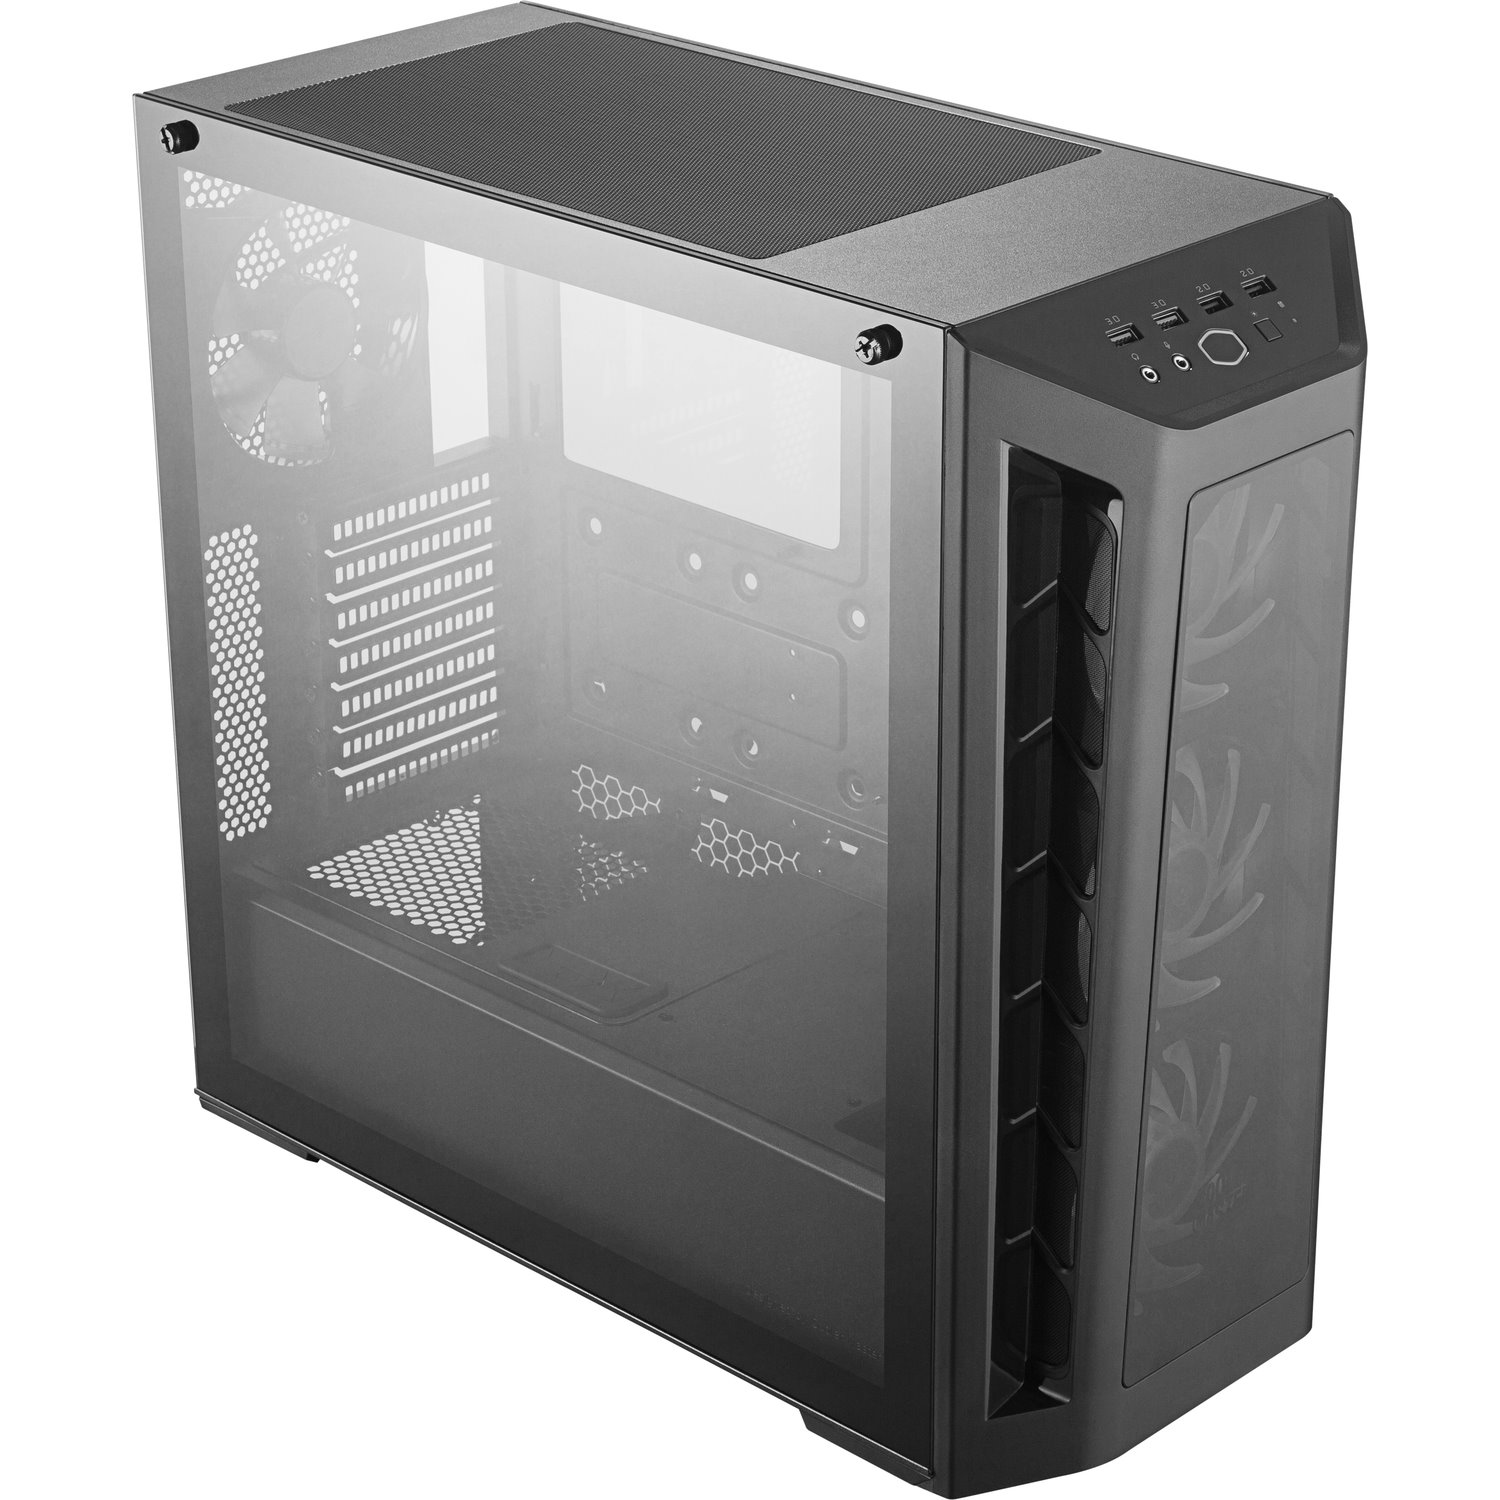 Cooler Master MasterBox MCB-B530P-KHNN-S01 Computer Case - ATX, Micro ATX, Mini ITX Motherboard Supported - Mid-tower - Steel, Plastic, Tempered Glass - Black